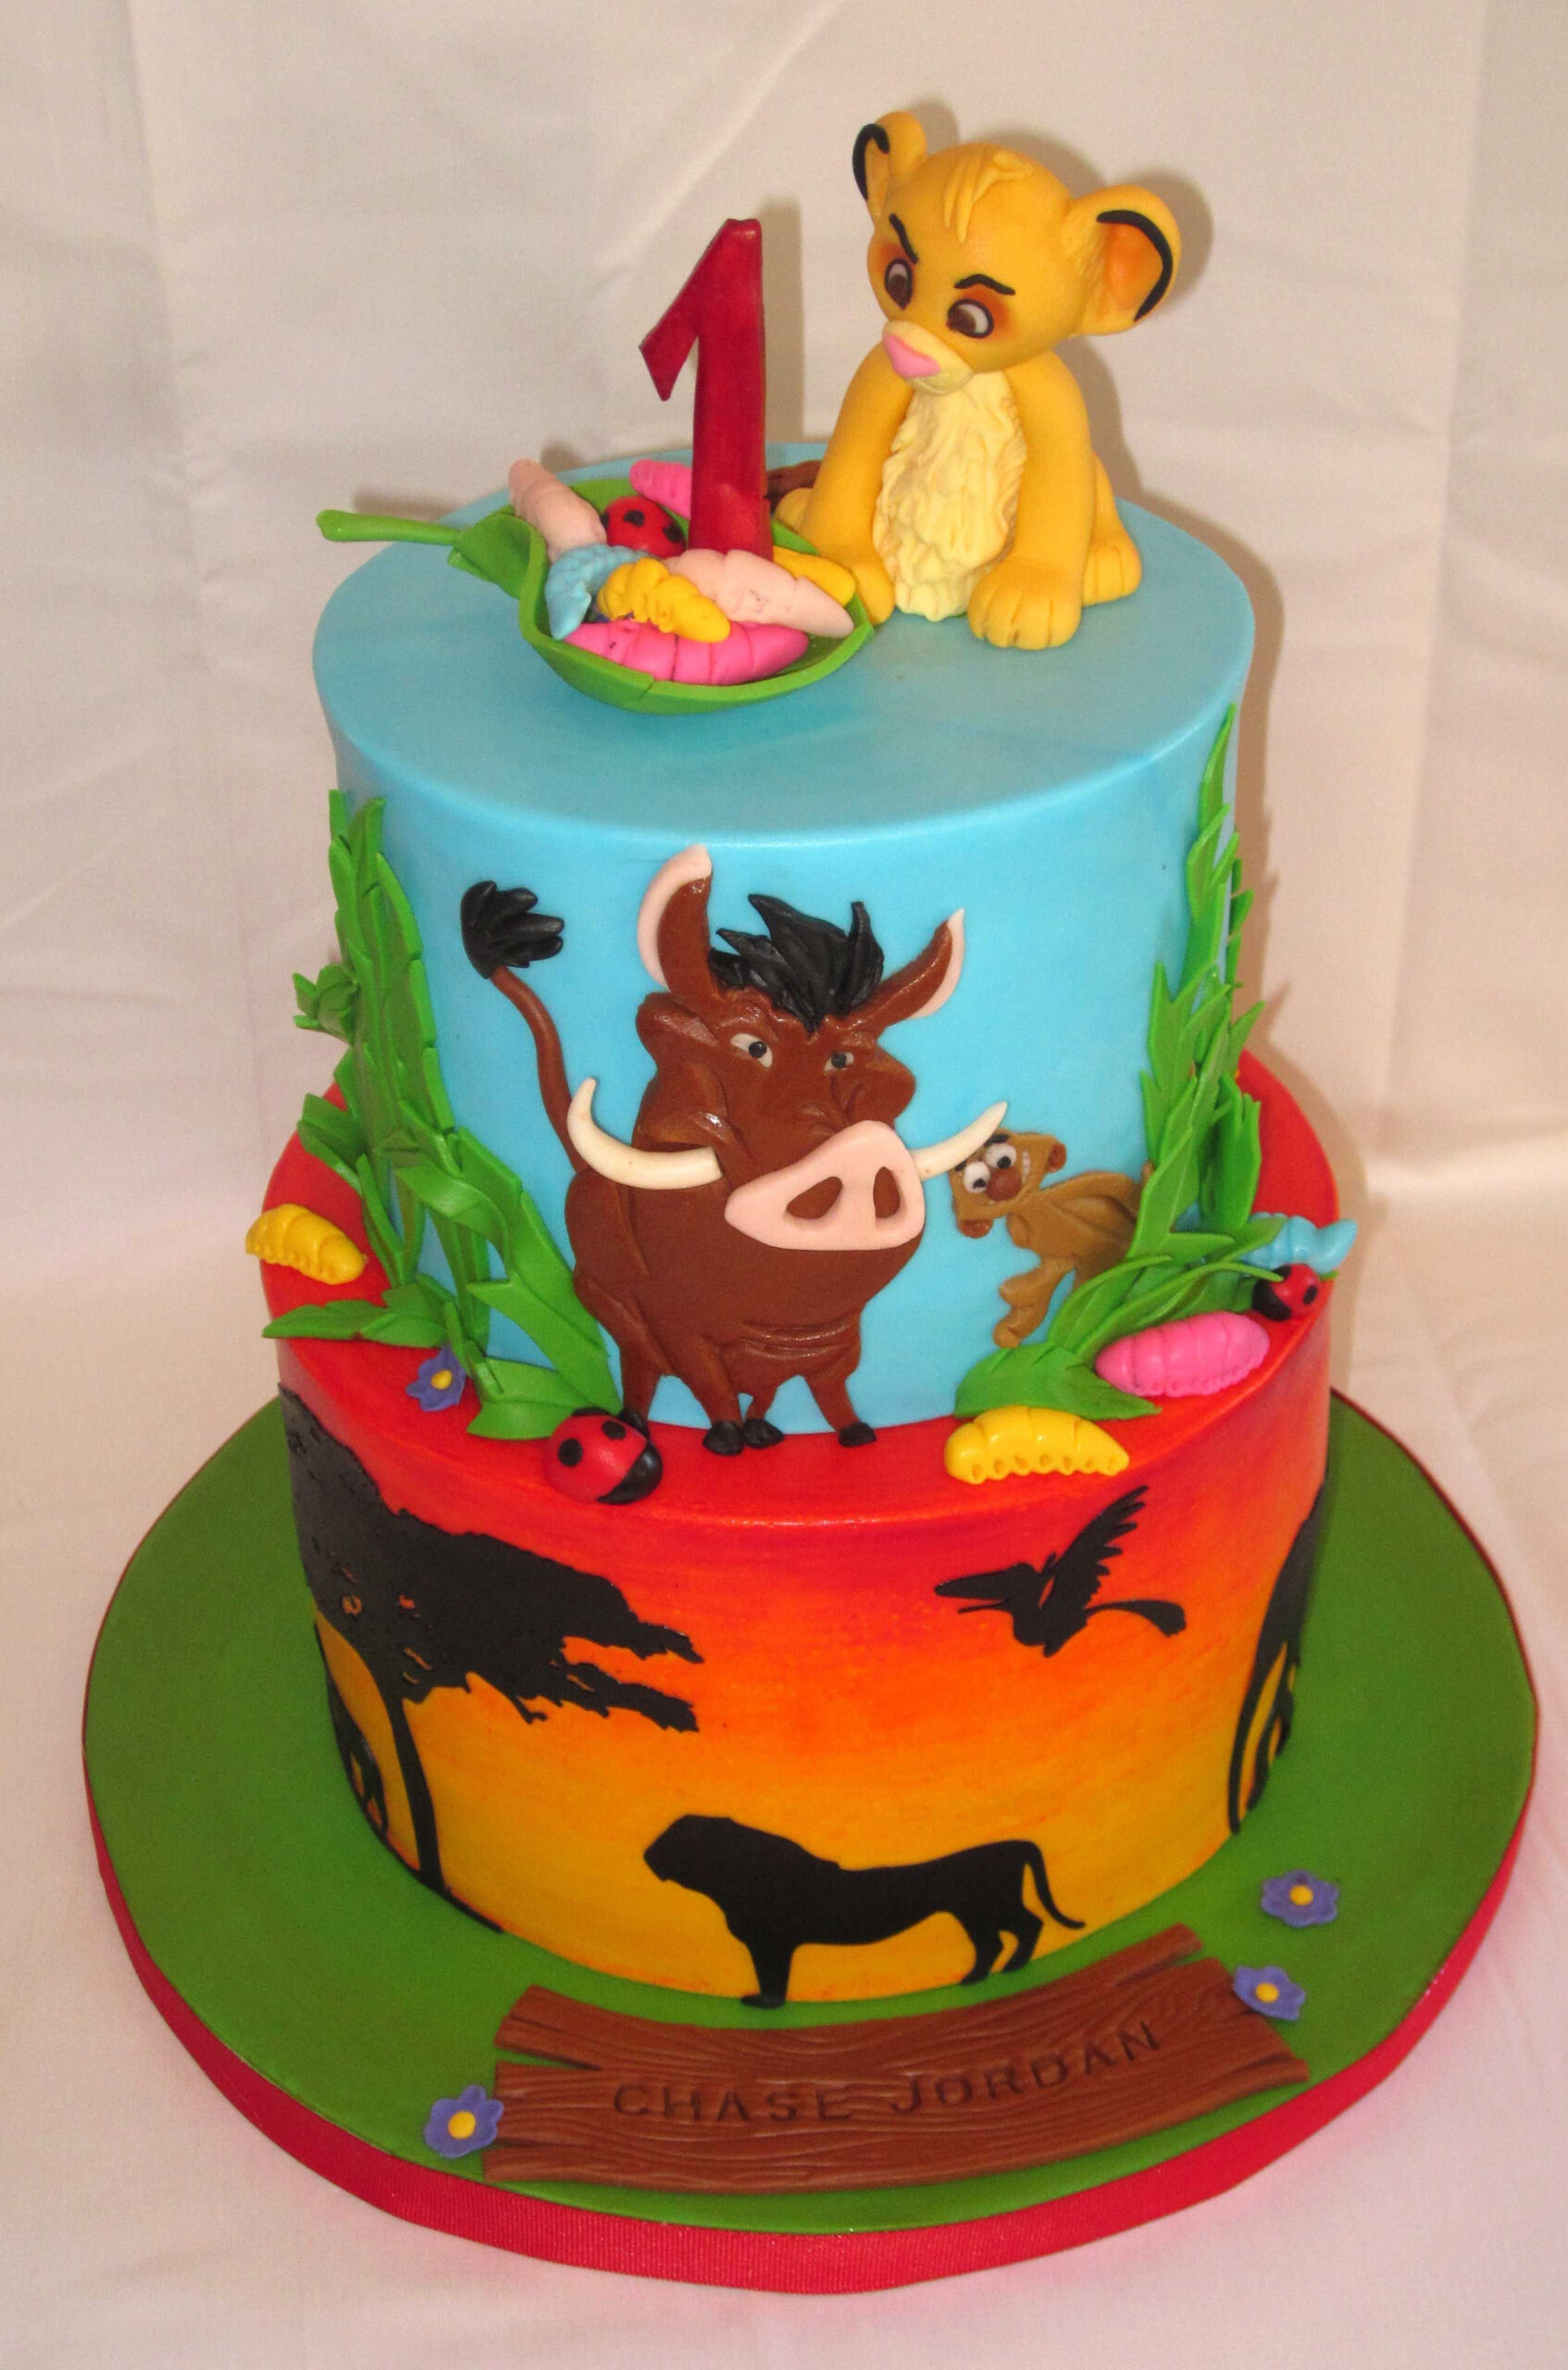 Lion King - Rendition Of A Famous Cake By Peggy Does Cakes And Came Out dedans Gâteau Roi Lion